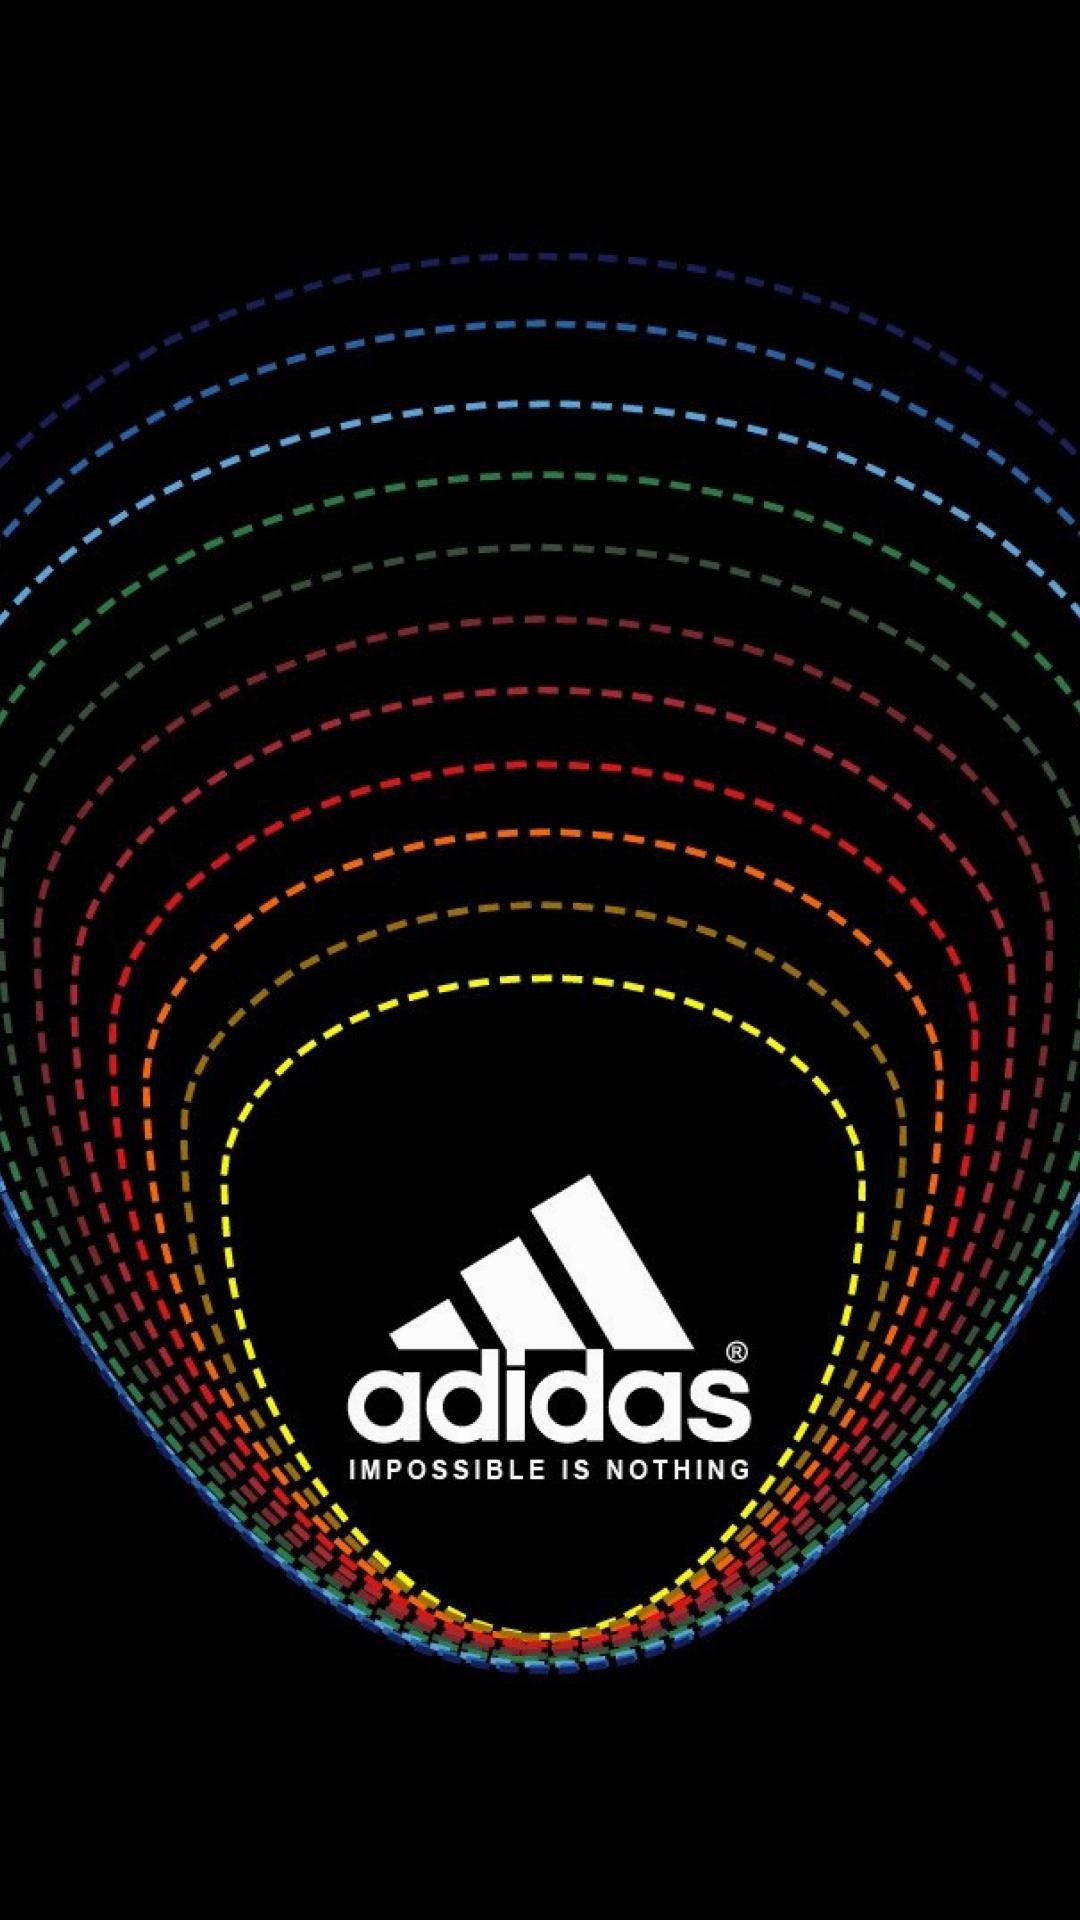 1080x1920 wallpaper.wiki-Adidas-Art-Iphone-Background-PIC-WPC0014238